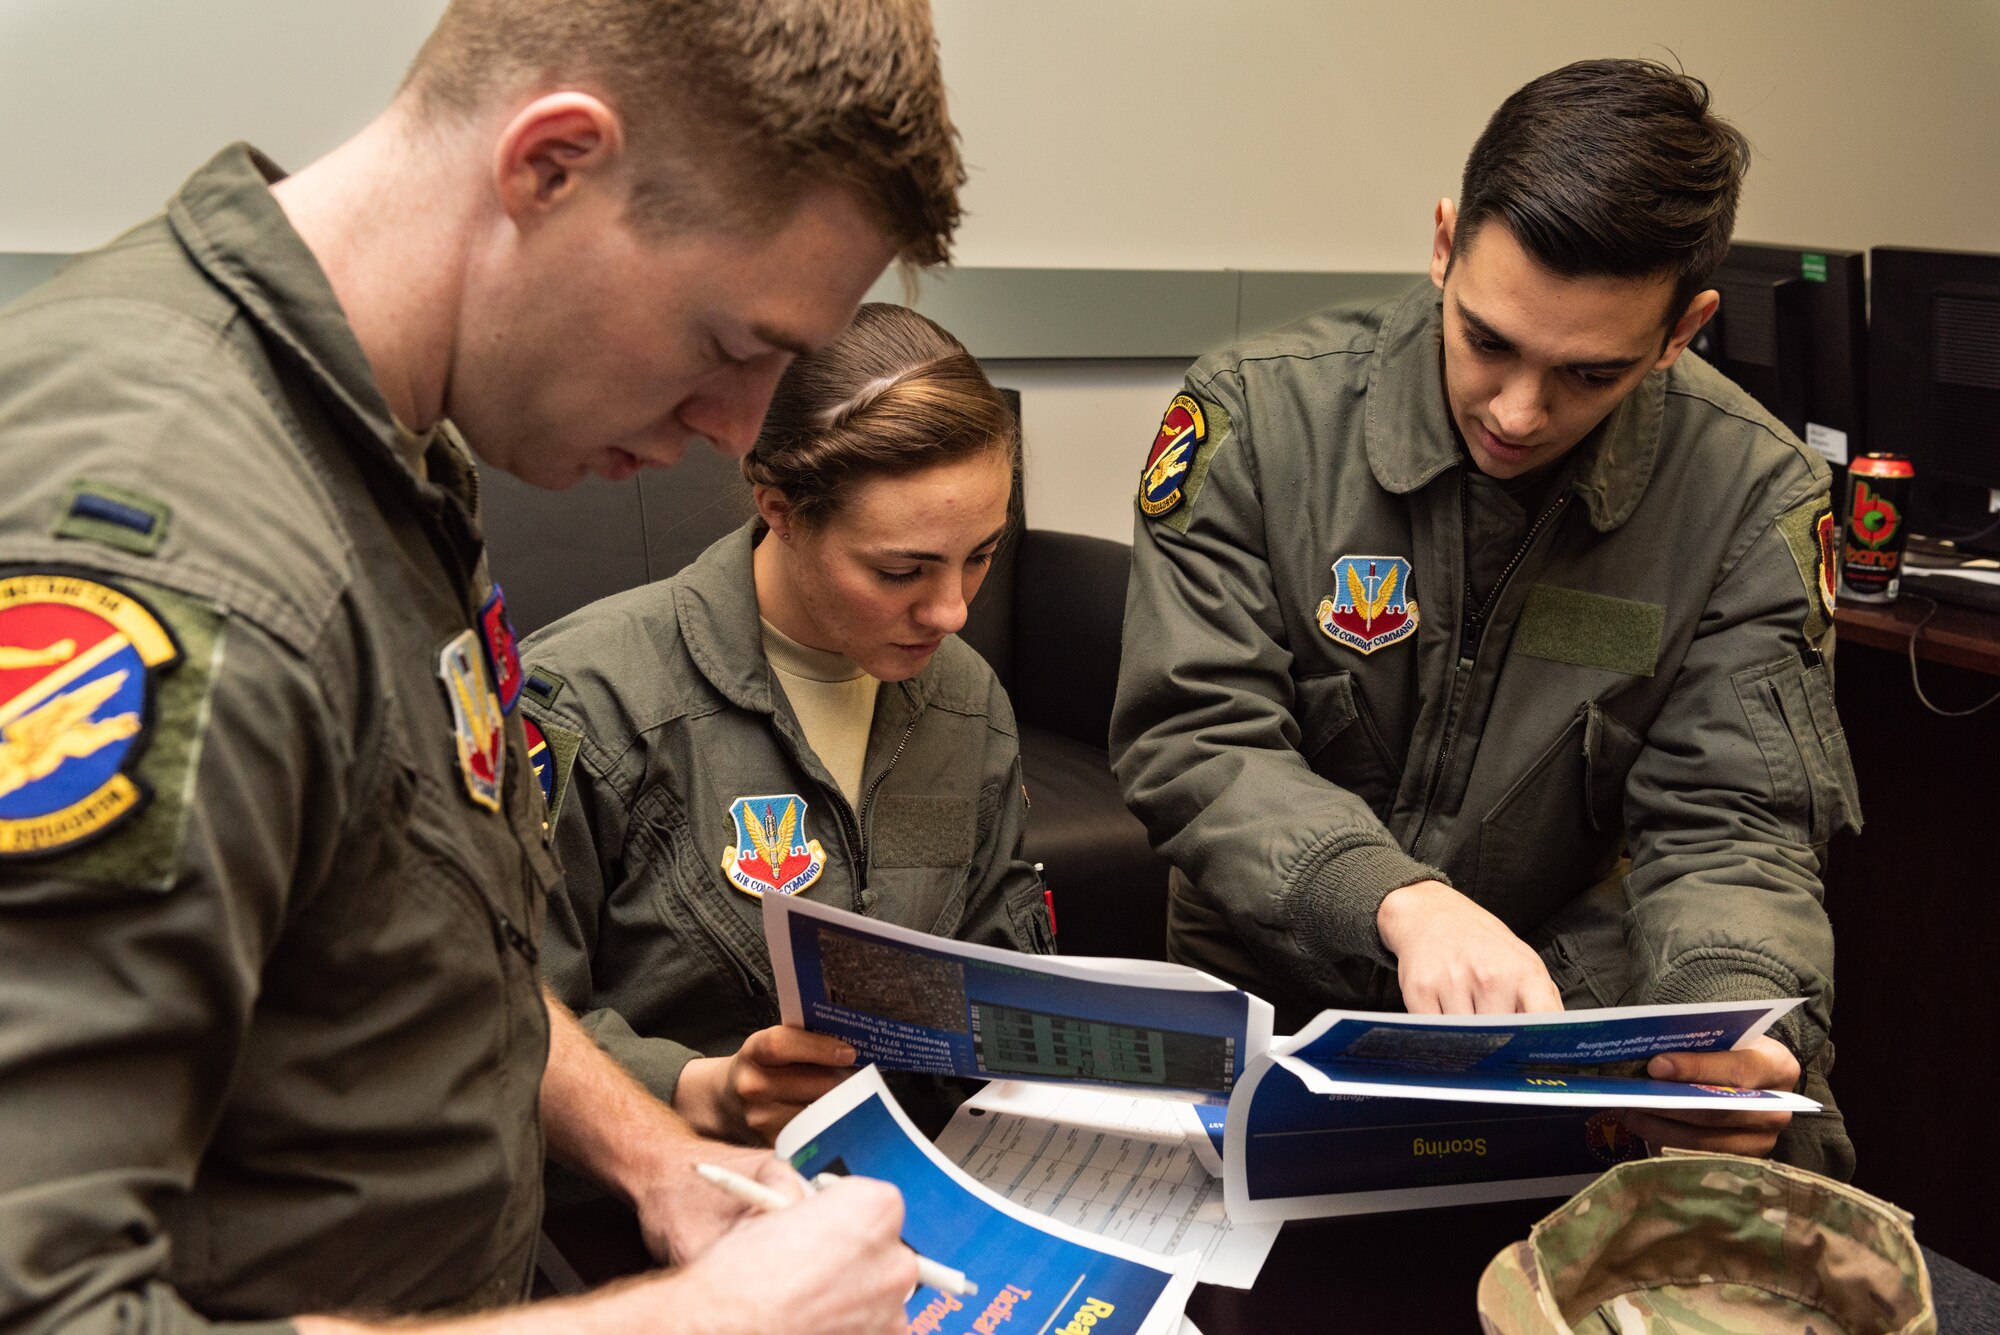 Three Airmen review tactical strategies on paper.